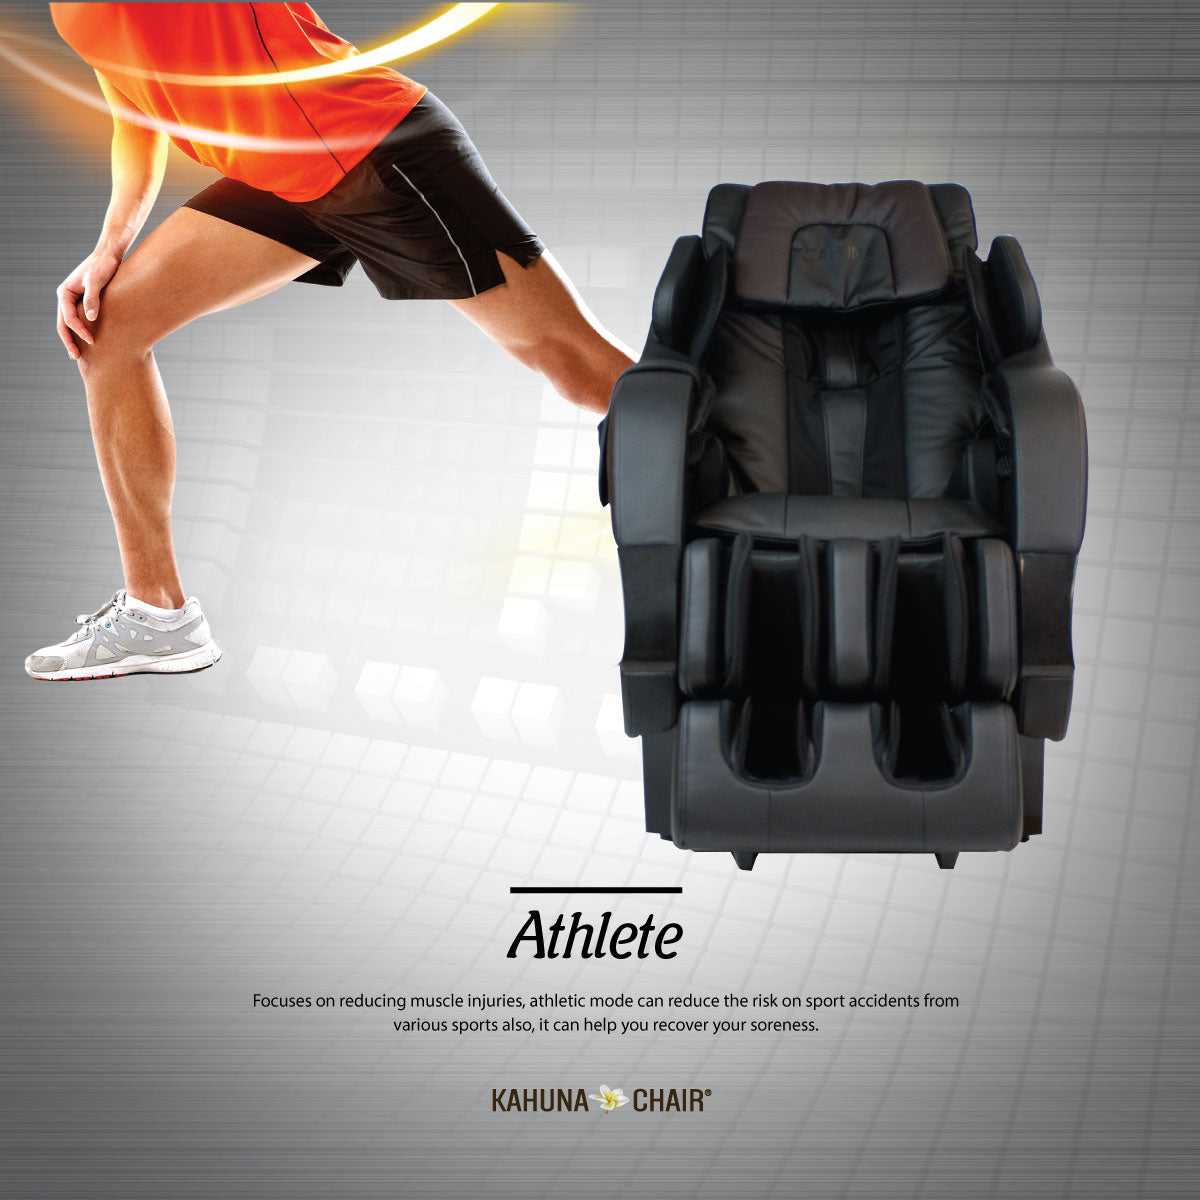 Kahuna SM-7300 Massage Chair Perfect For Athlete